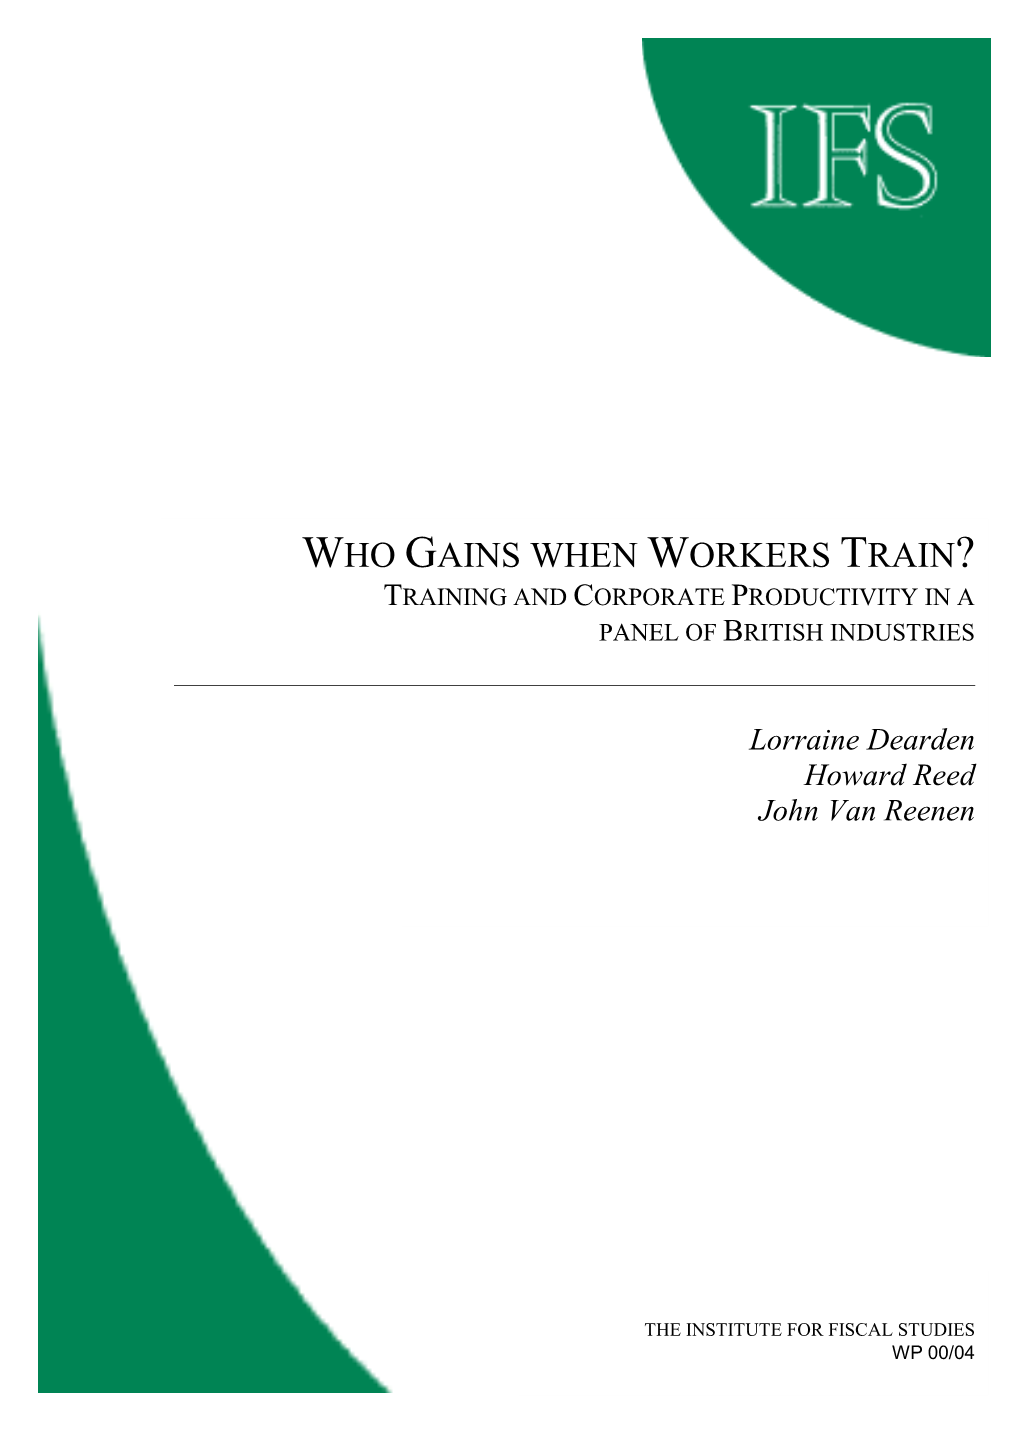 Who Gaind When Workers Train?